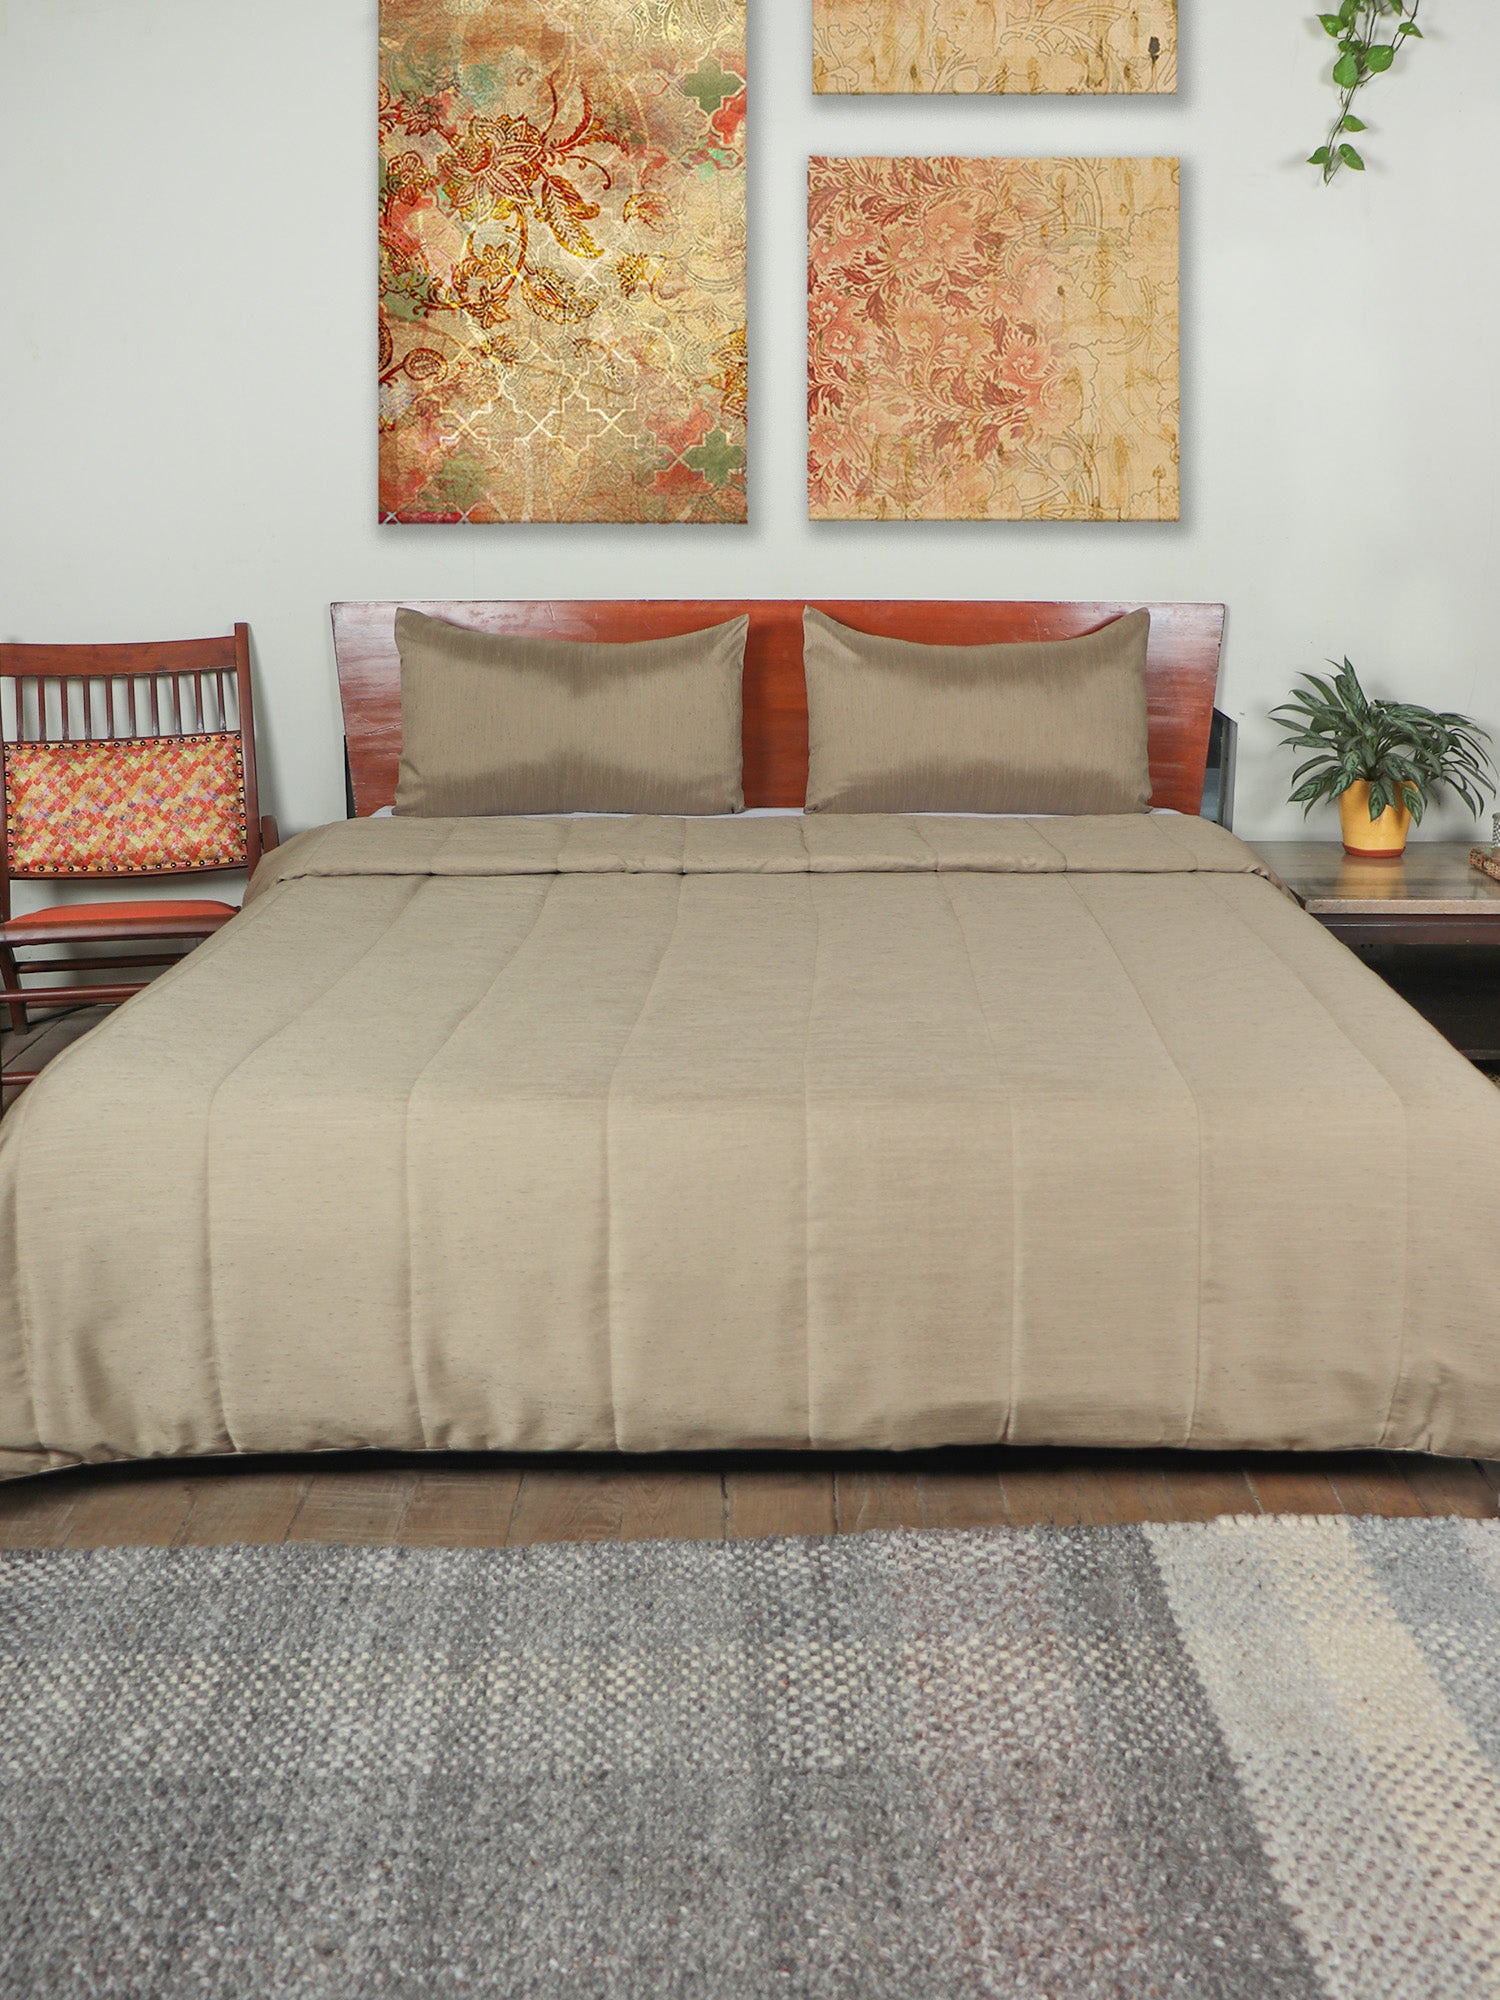 Quilt for Double Bed King Size | Horizontal Quilting | AC Comforter/Blanket/Duvet | Polyester with 100% Cotton 300TC Backing Fabric - Beige | 108x108 inch (228x274 cms)